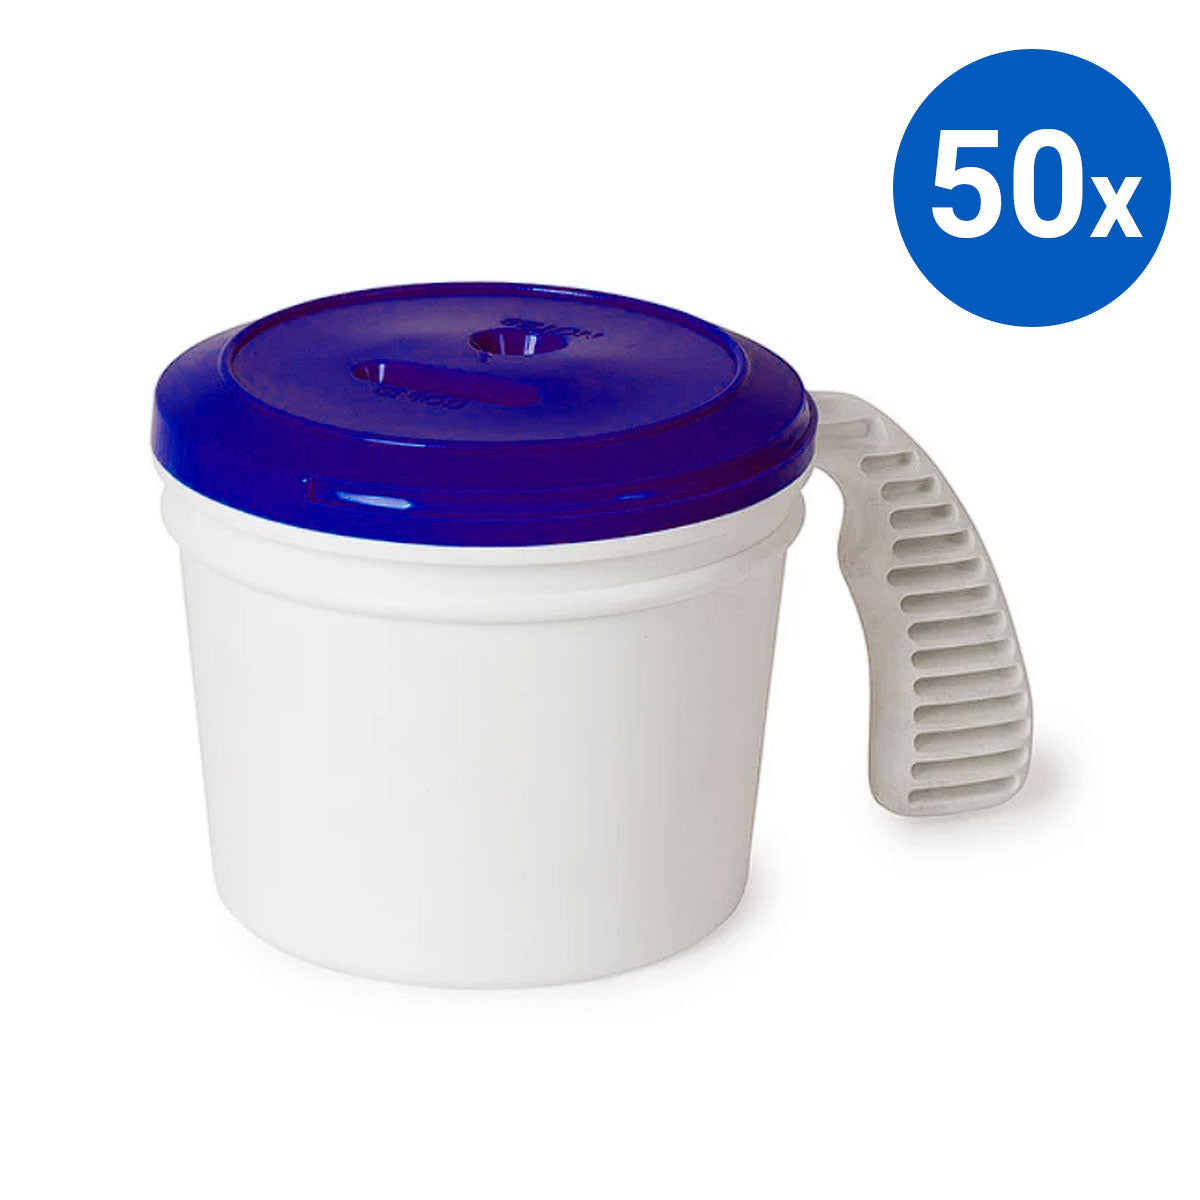 50x Collection Container Base and Standard Lid - Purple